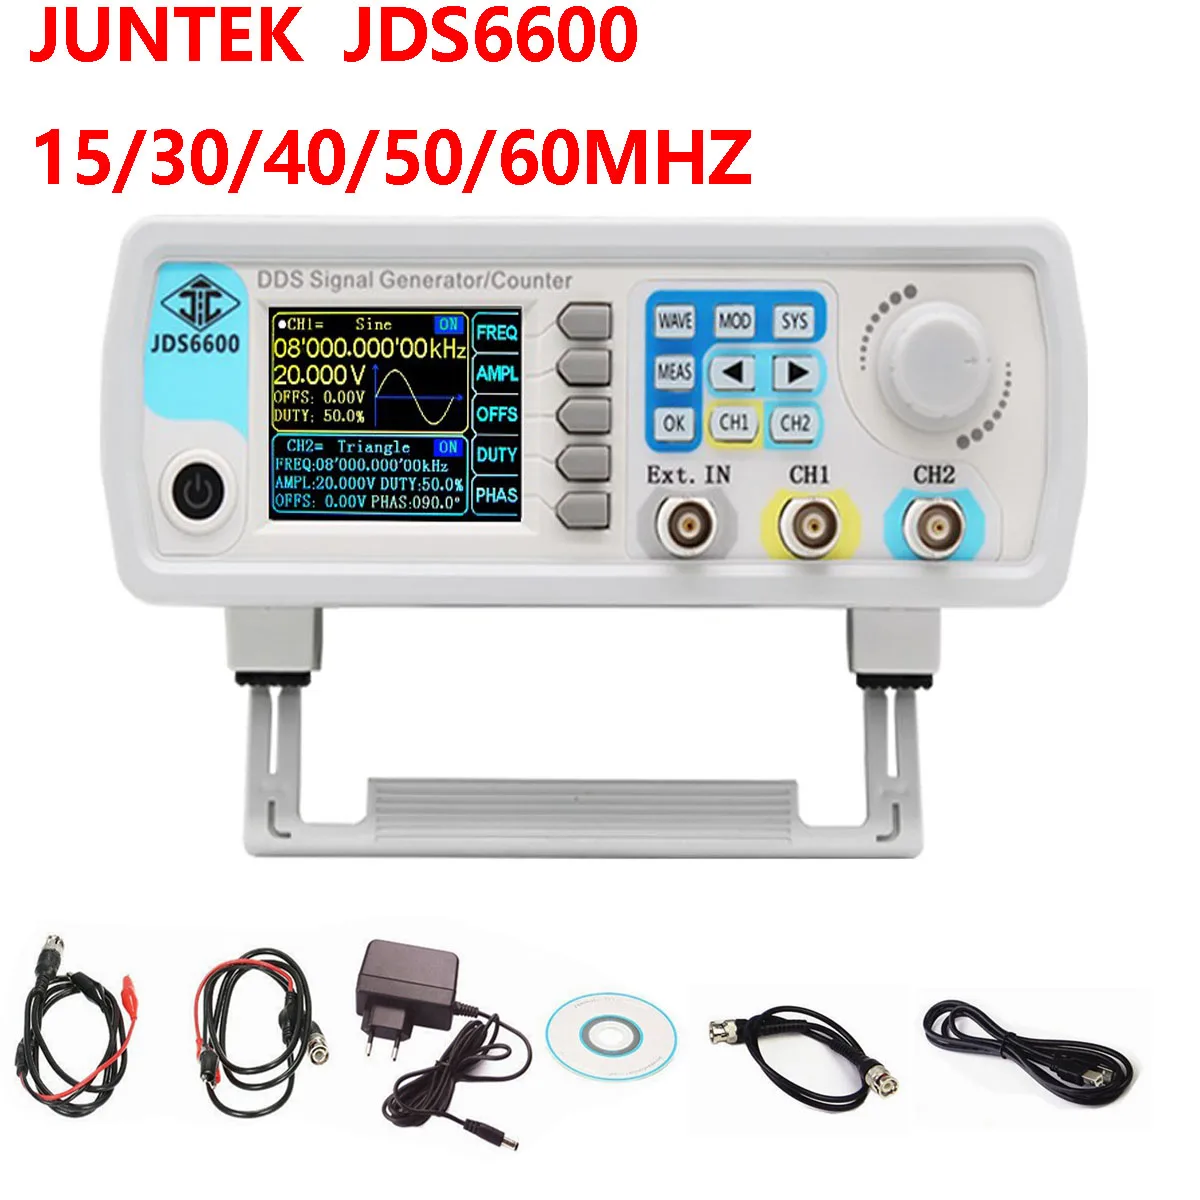 

JDS6600 15/30/40/50/60MHZ Digital Control Signal Generator Dual-channel DDS Function Arbitrary Sine Waveform Frequency Meter